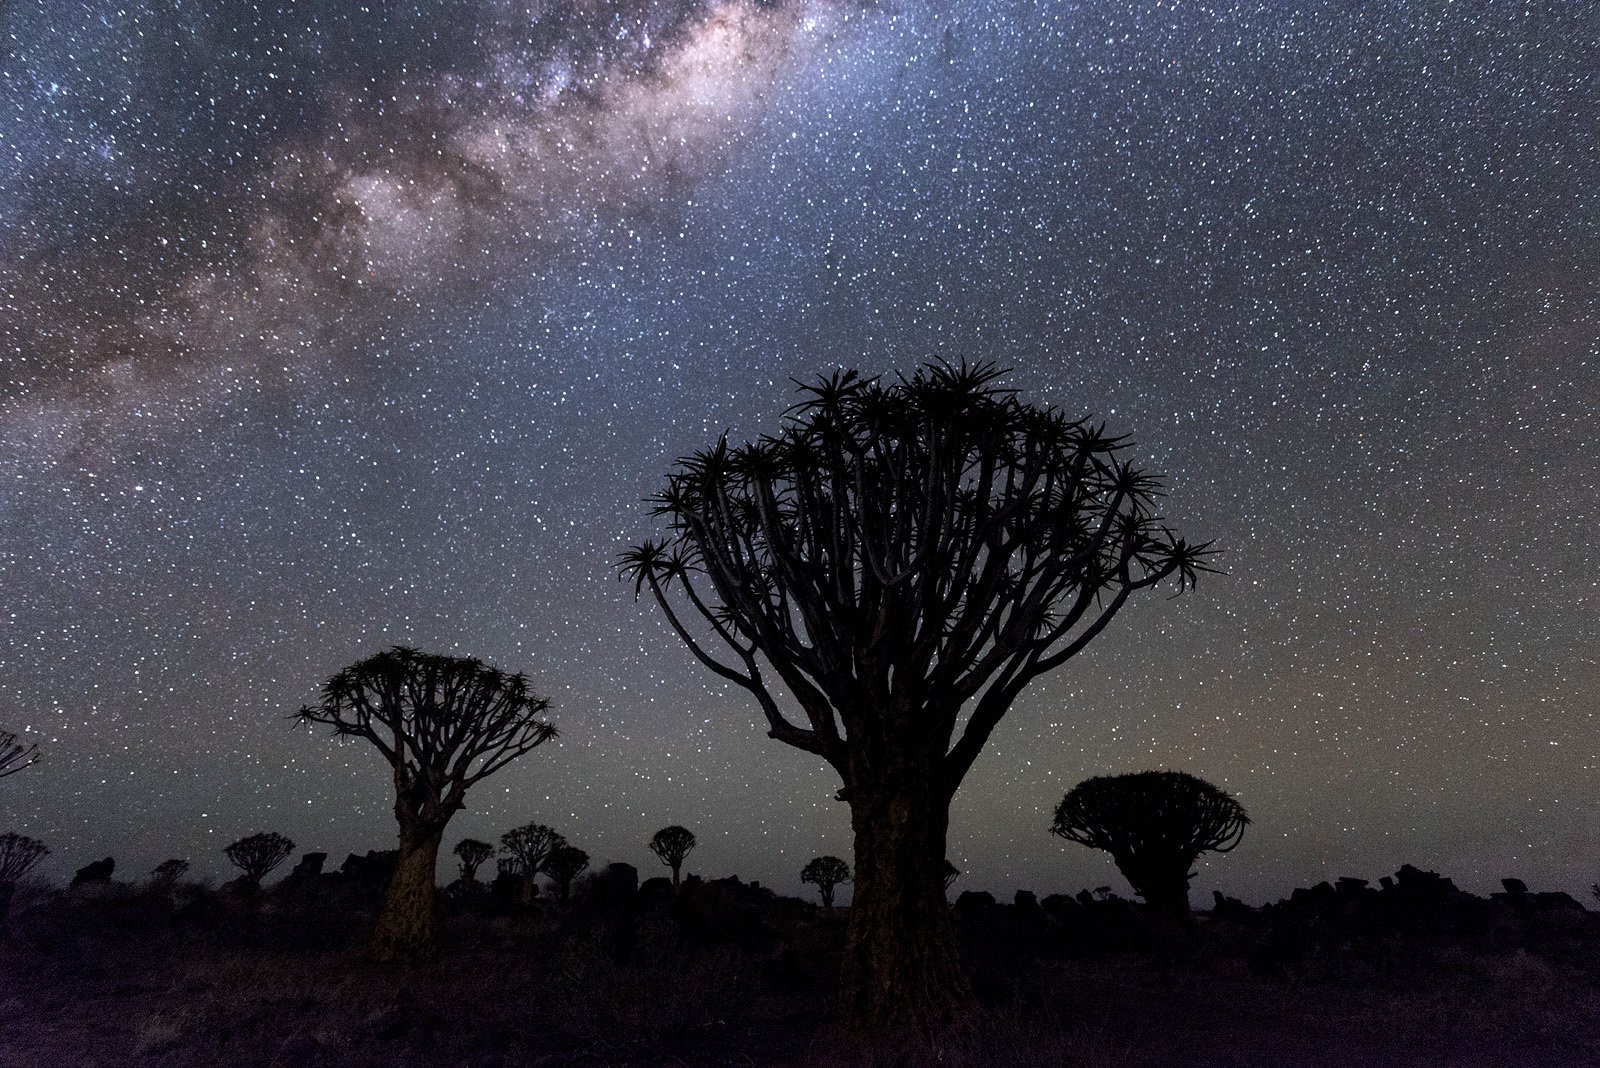 Quivertree Forest Park, Namibia, Nature, Star - Space, Night, Milky Way, Astronomy, Sky, Tree, Landscape, Galaxy, Space, Blue, Dark, Nebula, Scenics, Planet - Space, Africa, Black Color, Beauty In Nature, Science, Constellation, Outdoors, Alex Mimo